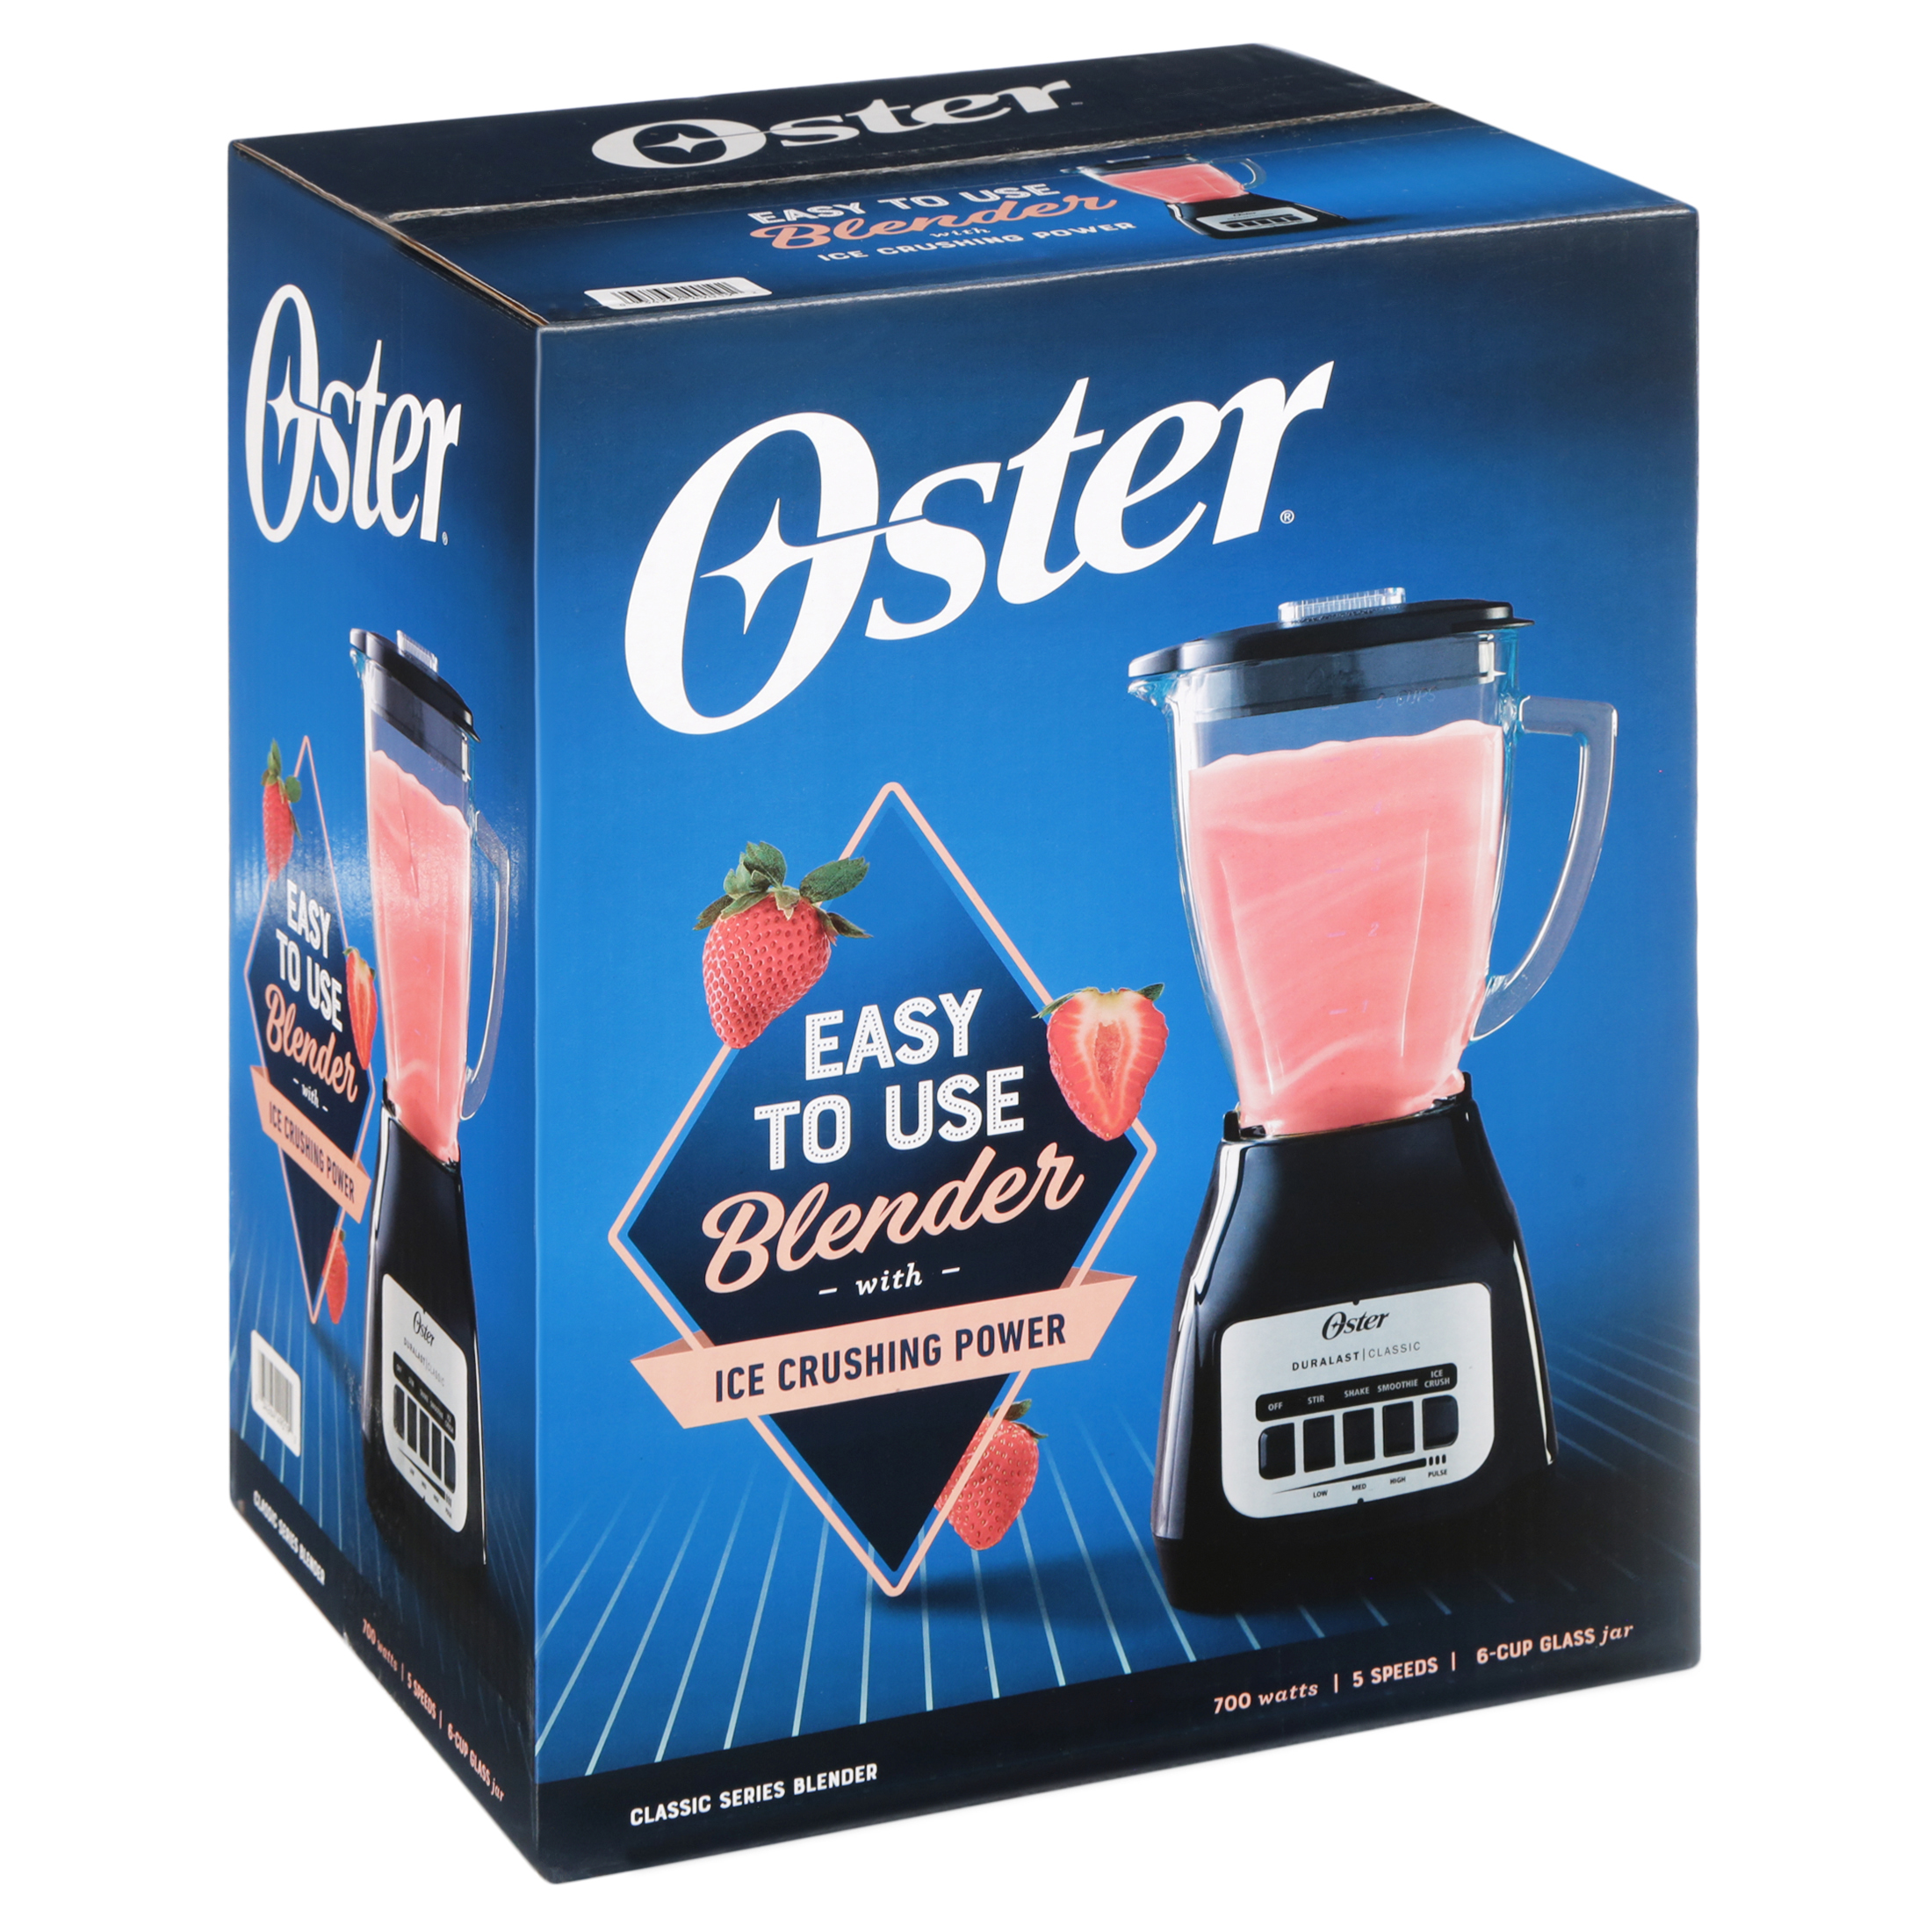 Oster Easy-to-Use Blender with 5-Speeds and 6-Cup Glass Jar, Black, New - image 4 of 9